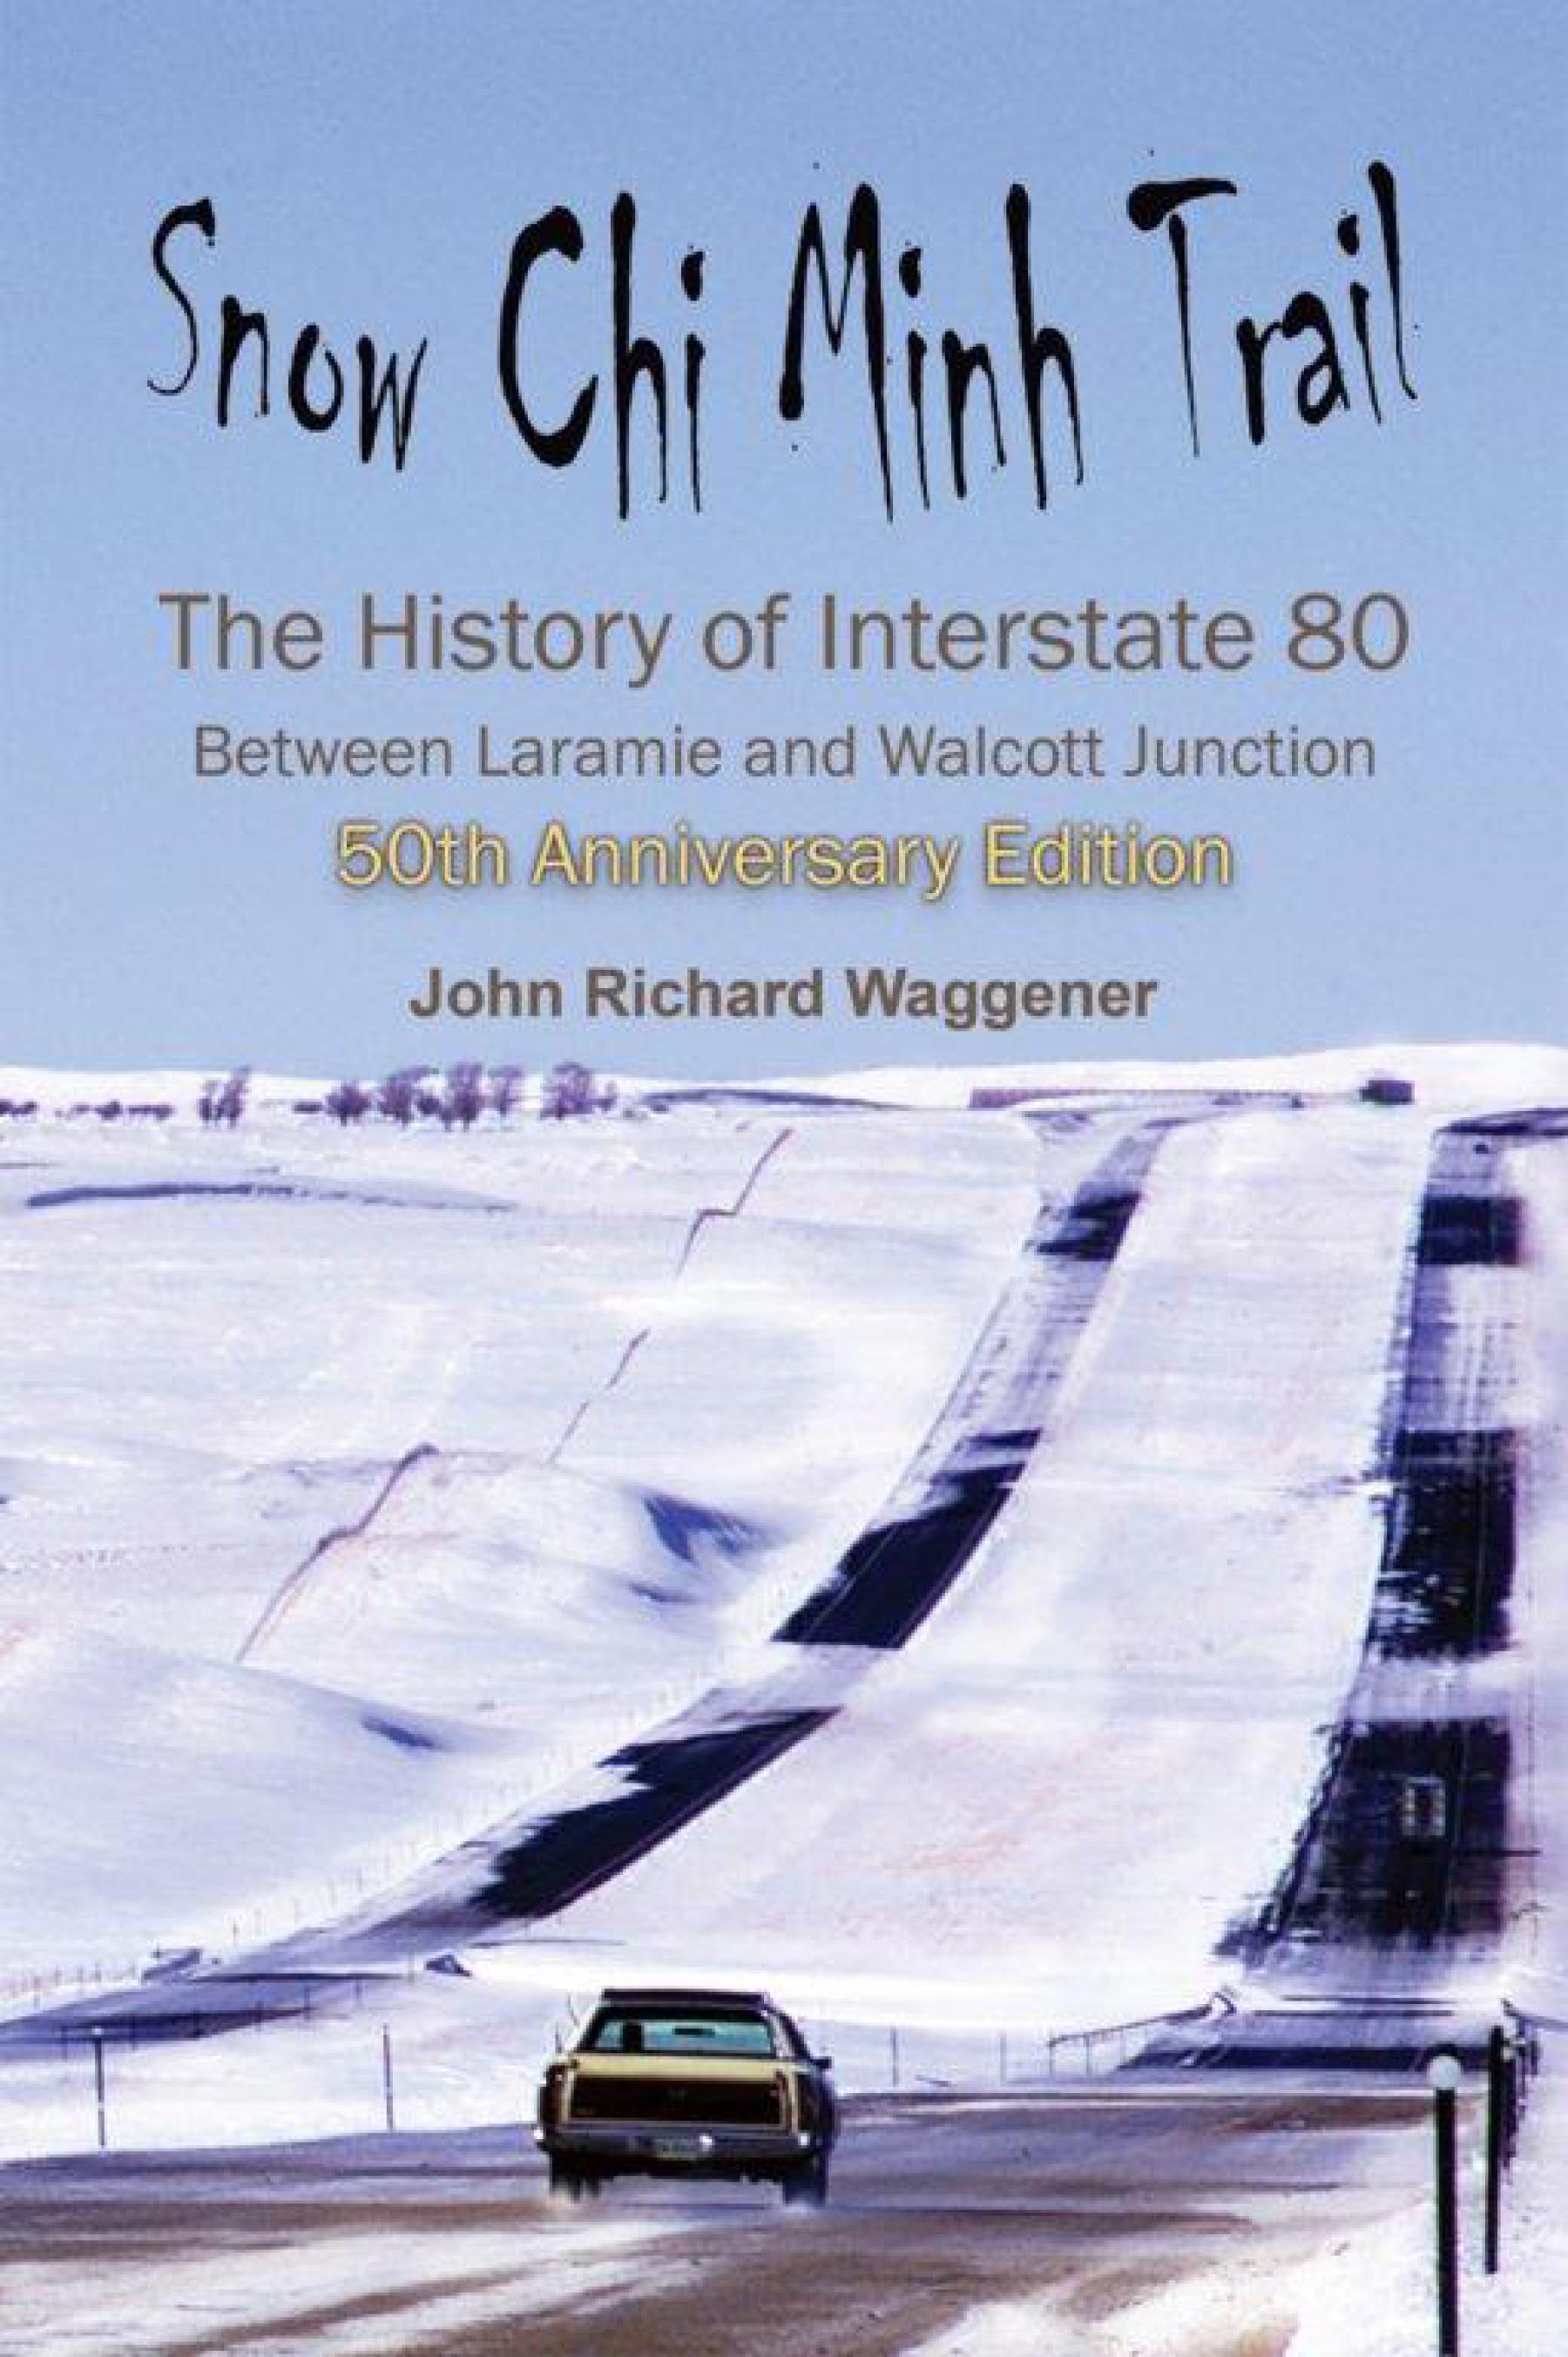 "Snow Chi Minh Trail: The History of Interstate 80" 50TH ANNIVERSARY EDITION by John Richard Waggener. 